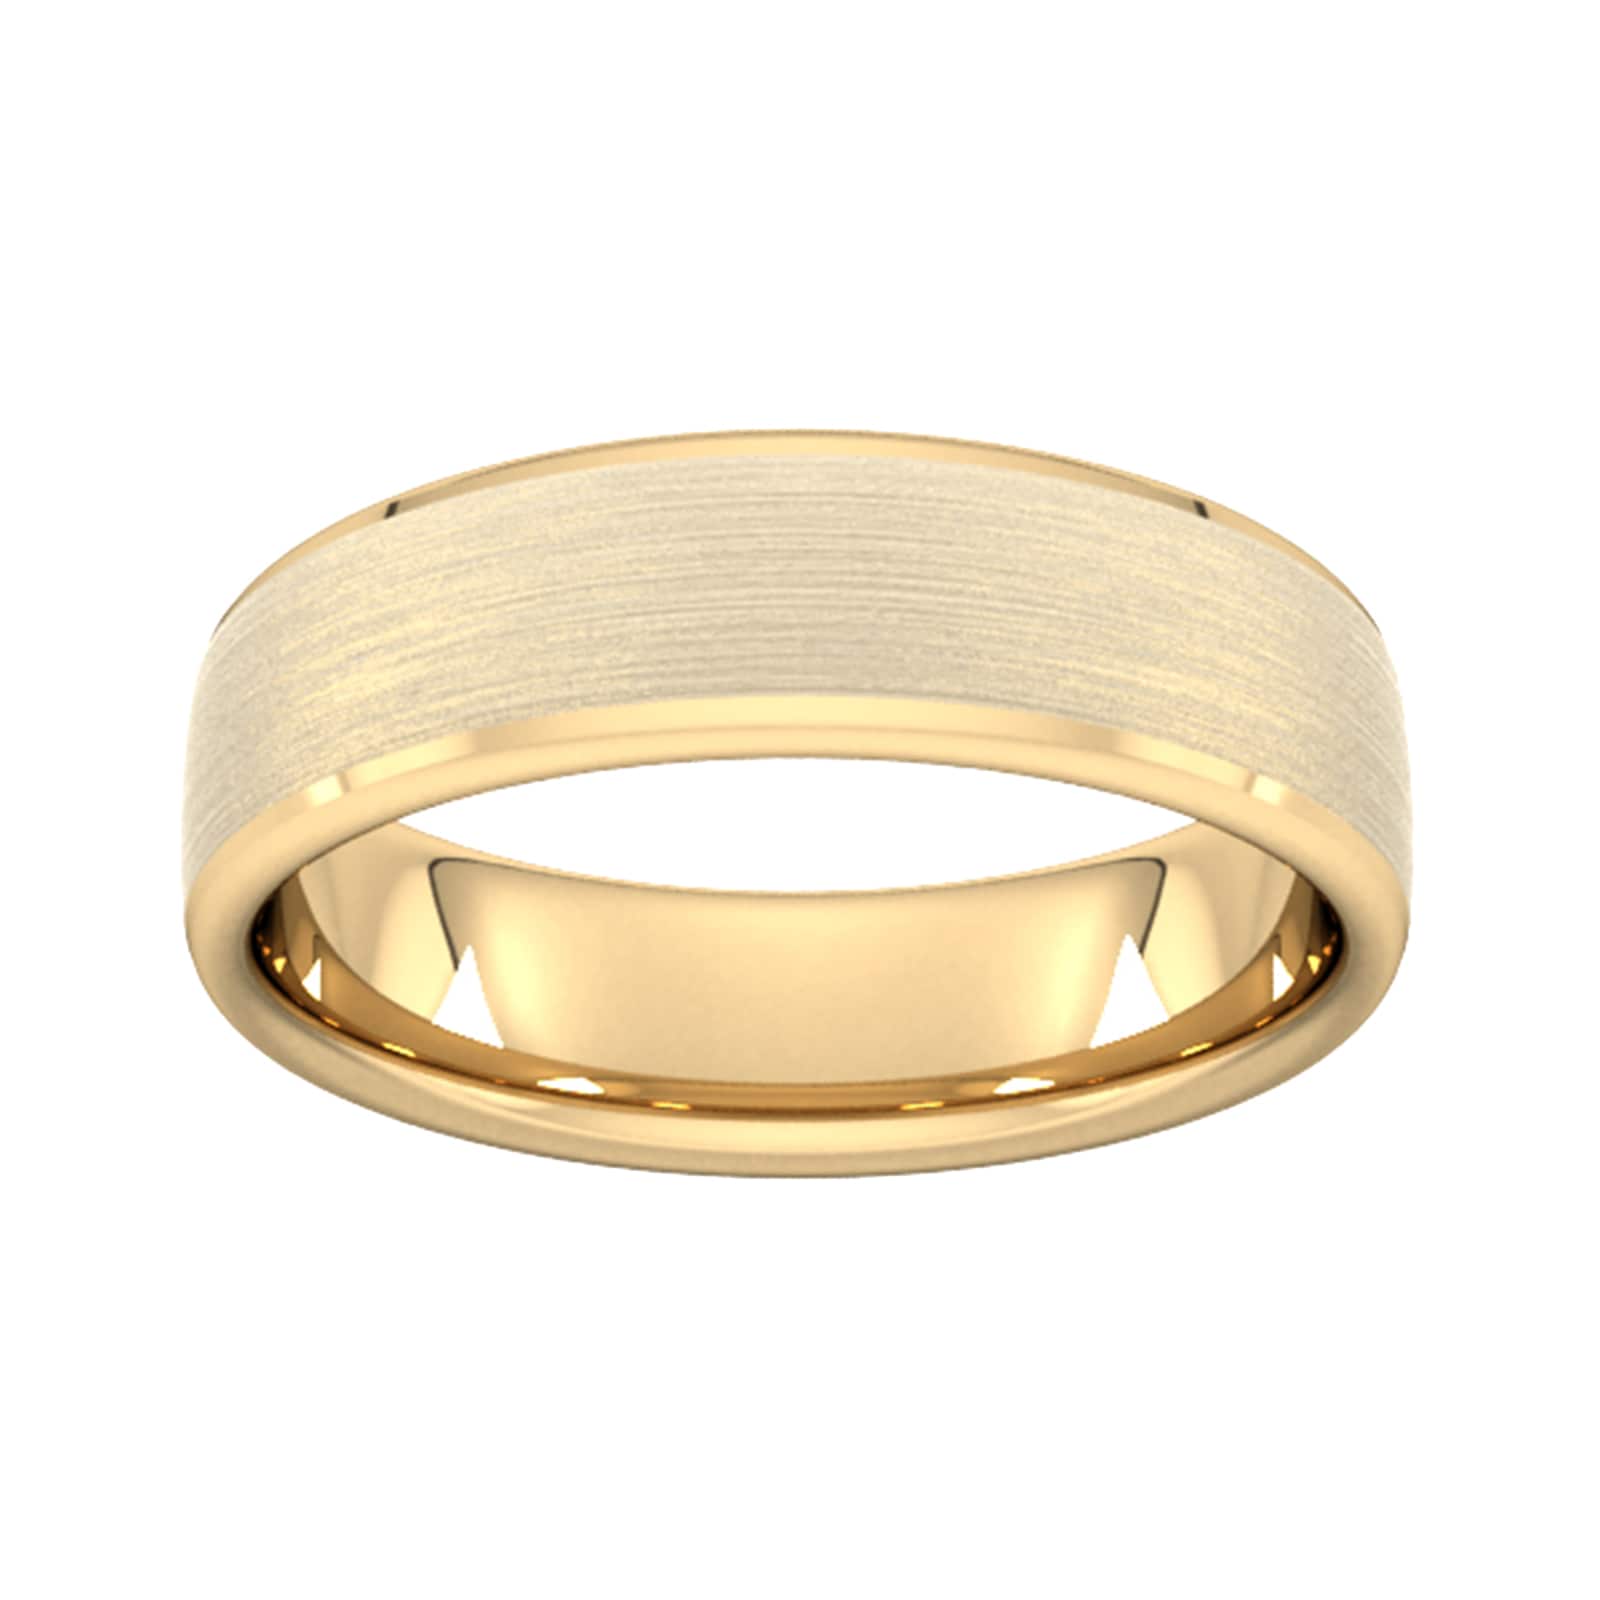 6mm Slight Court Heavy Polished Chamfered Edges With Matt Centre Wedding Ring In 9 Carat Yellow Gold - Ring Size I